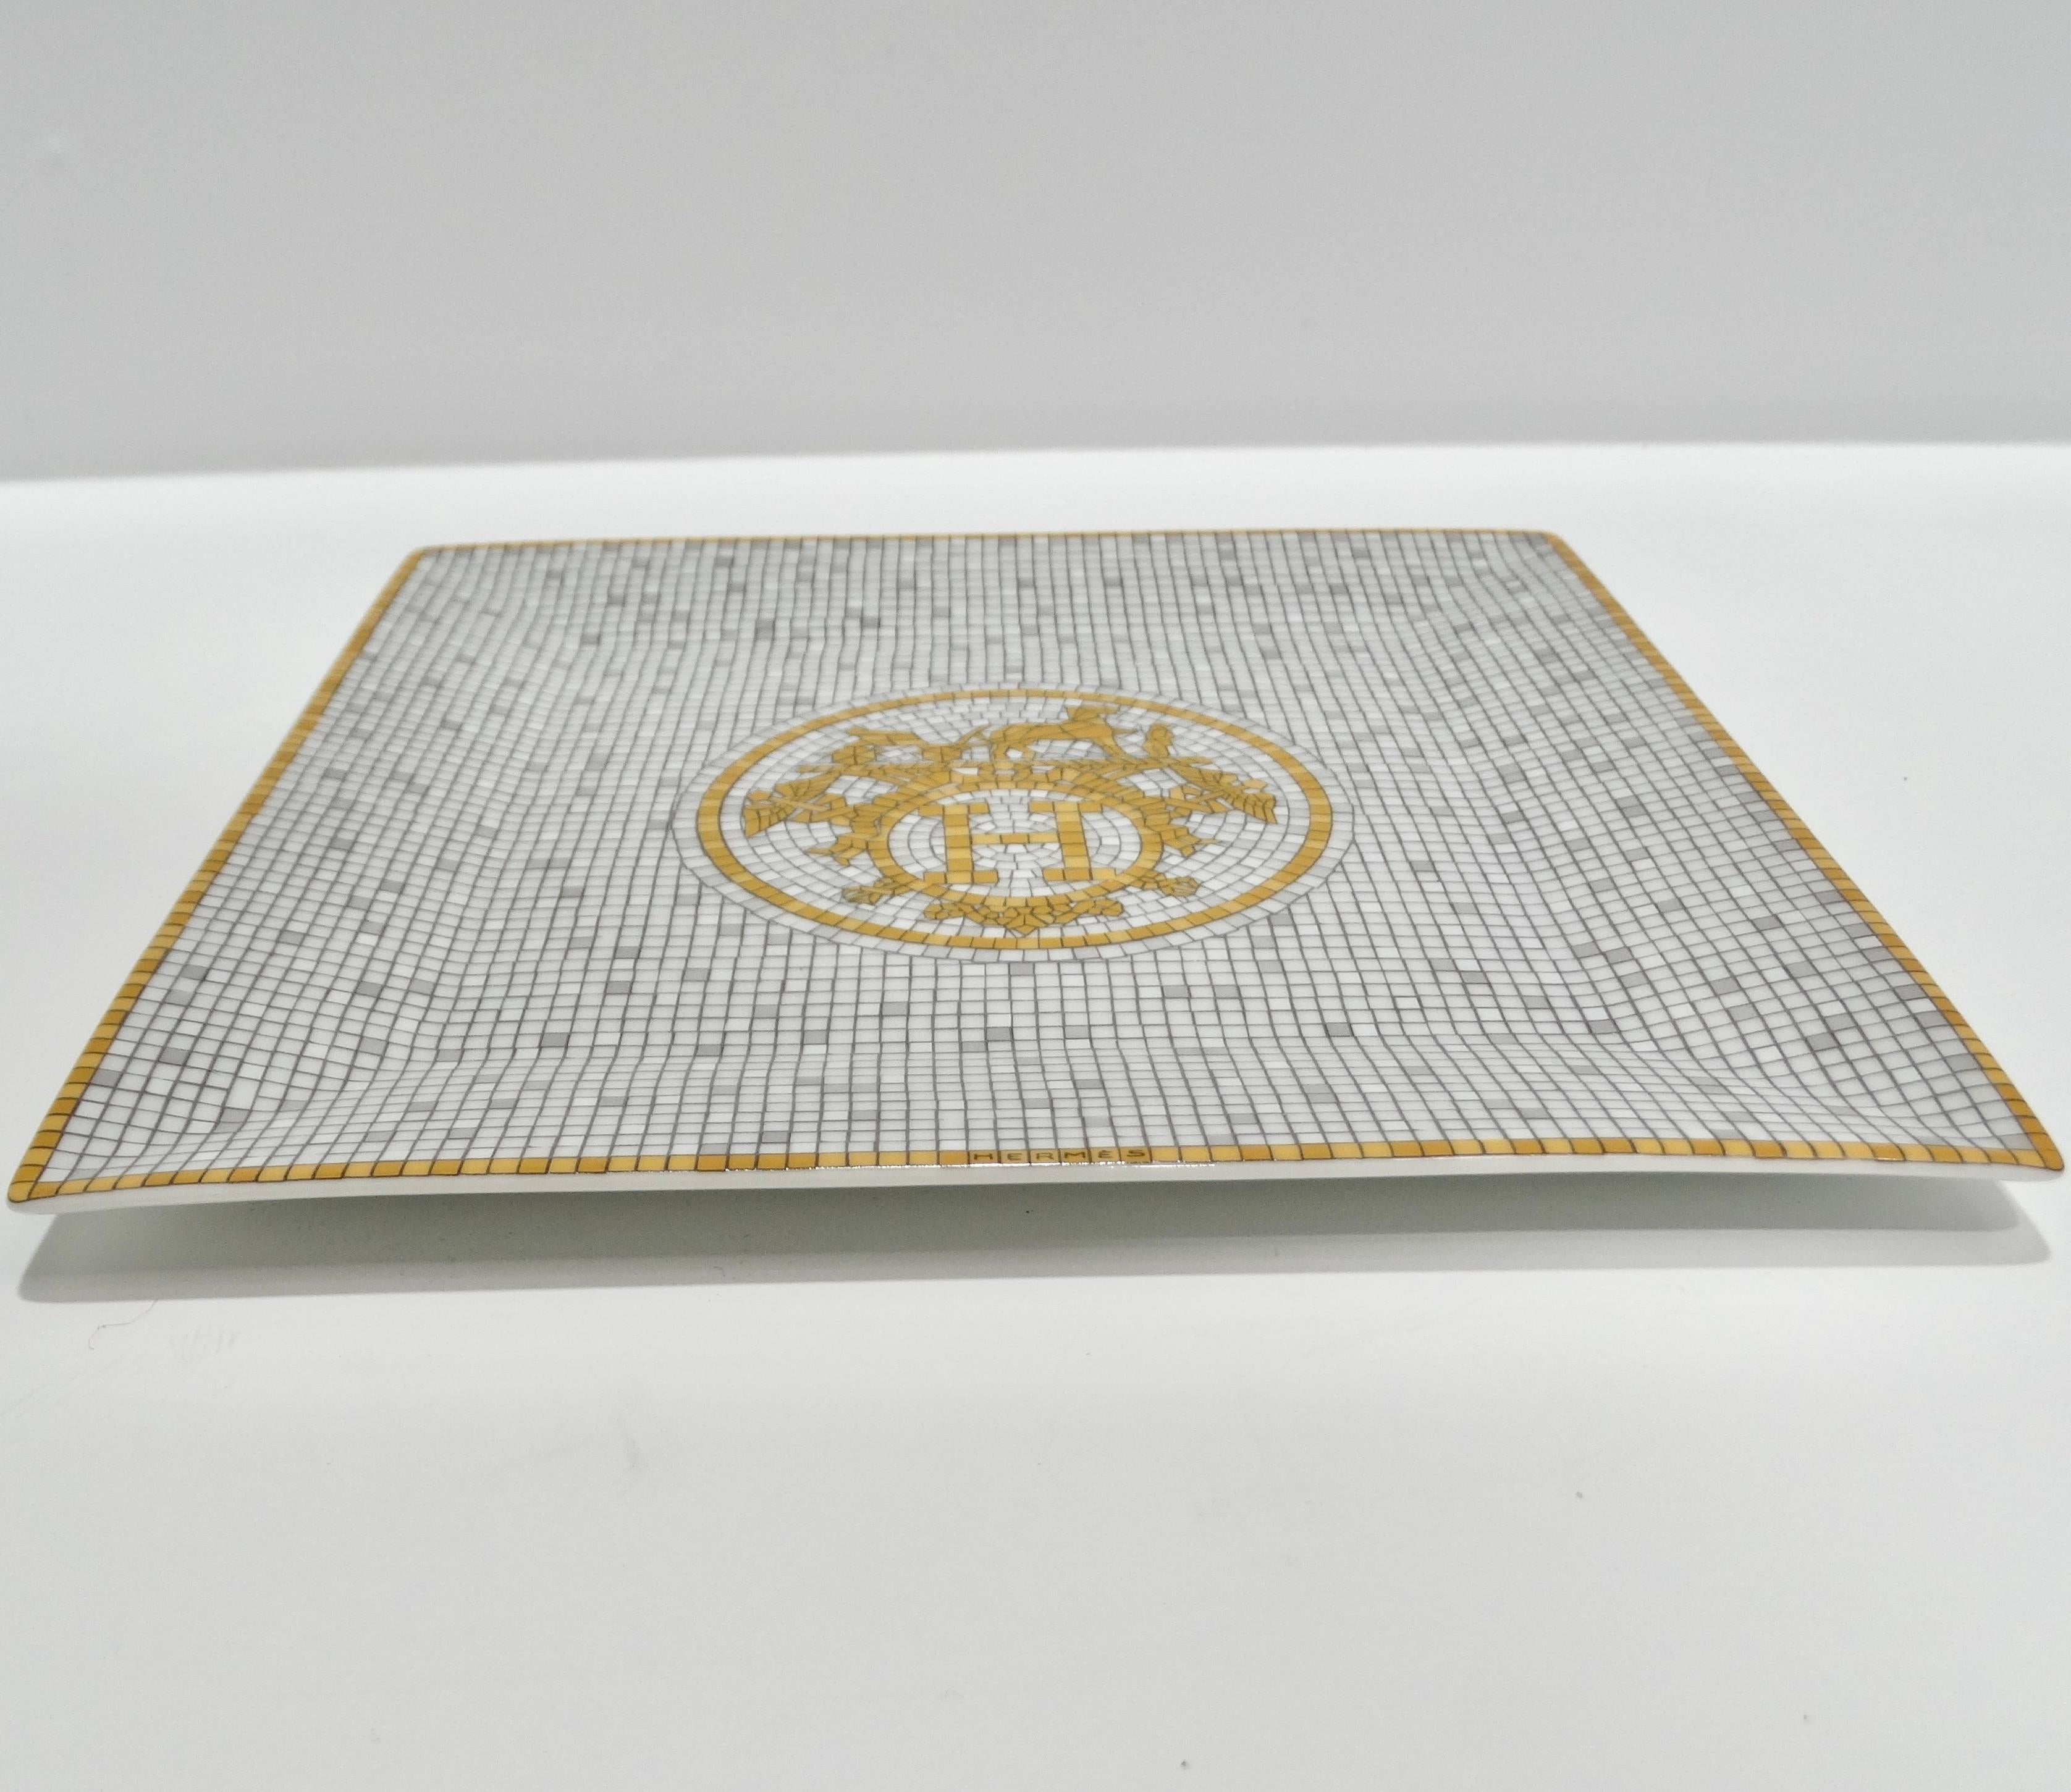 Hermes Mosaique Square Plate For Sale 3